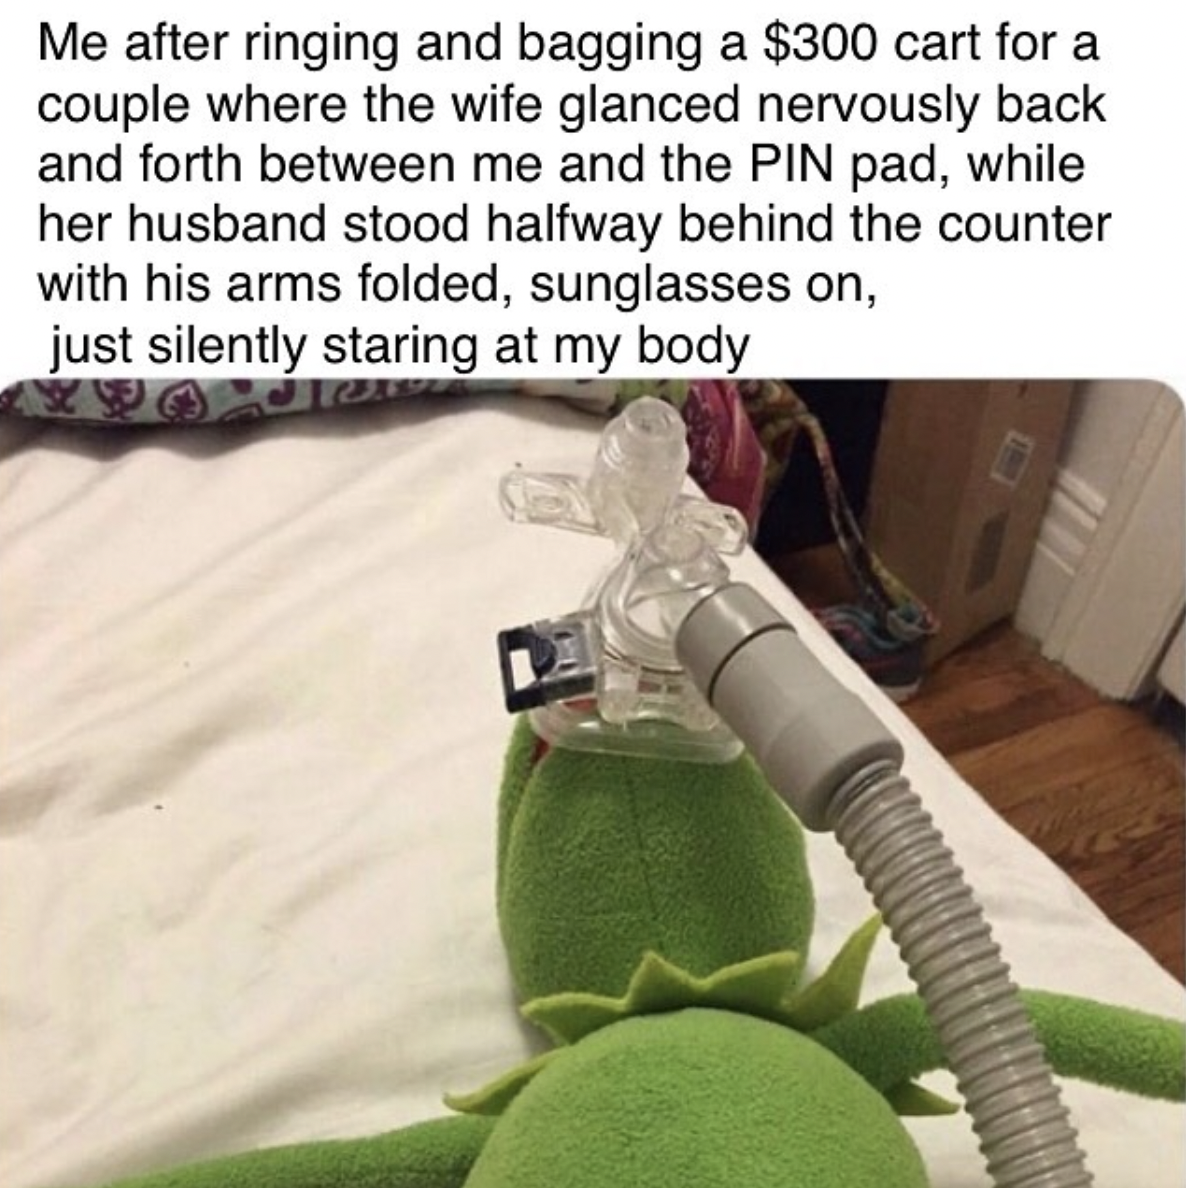 Meme of Kermit the frog on oxygen with the caption &quot;Me after ringing and bagging a $300 cart for a couple&quot; where the wife glanced at them and the PIN machine nervously and the husband stood with his arms folded and stared at their body